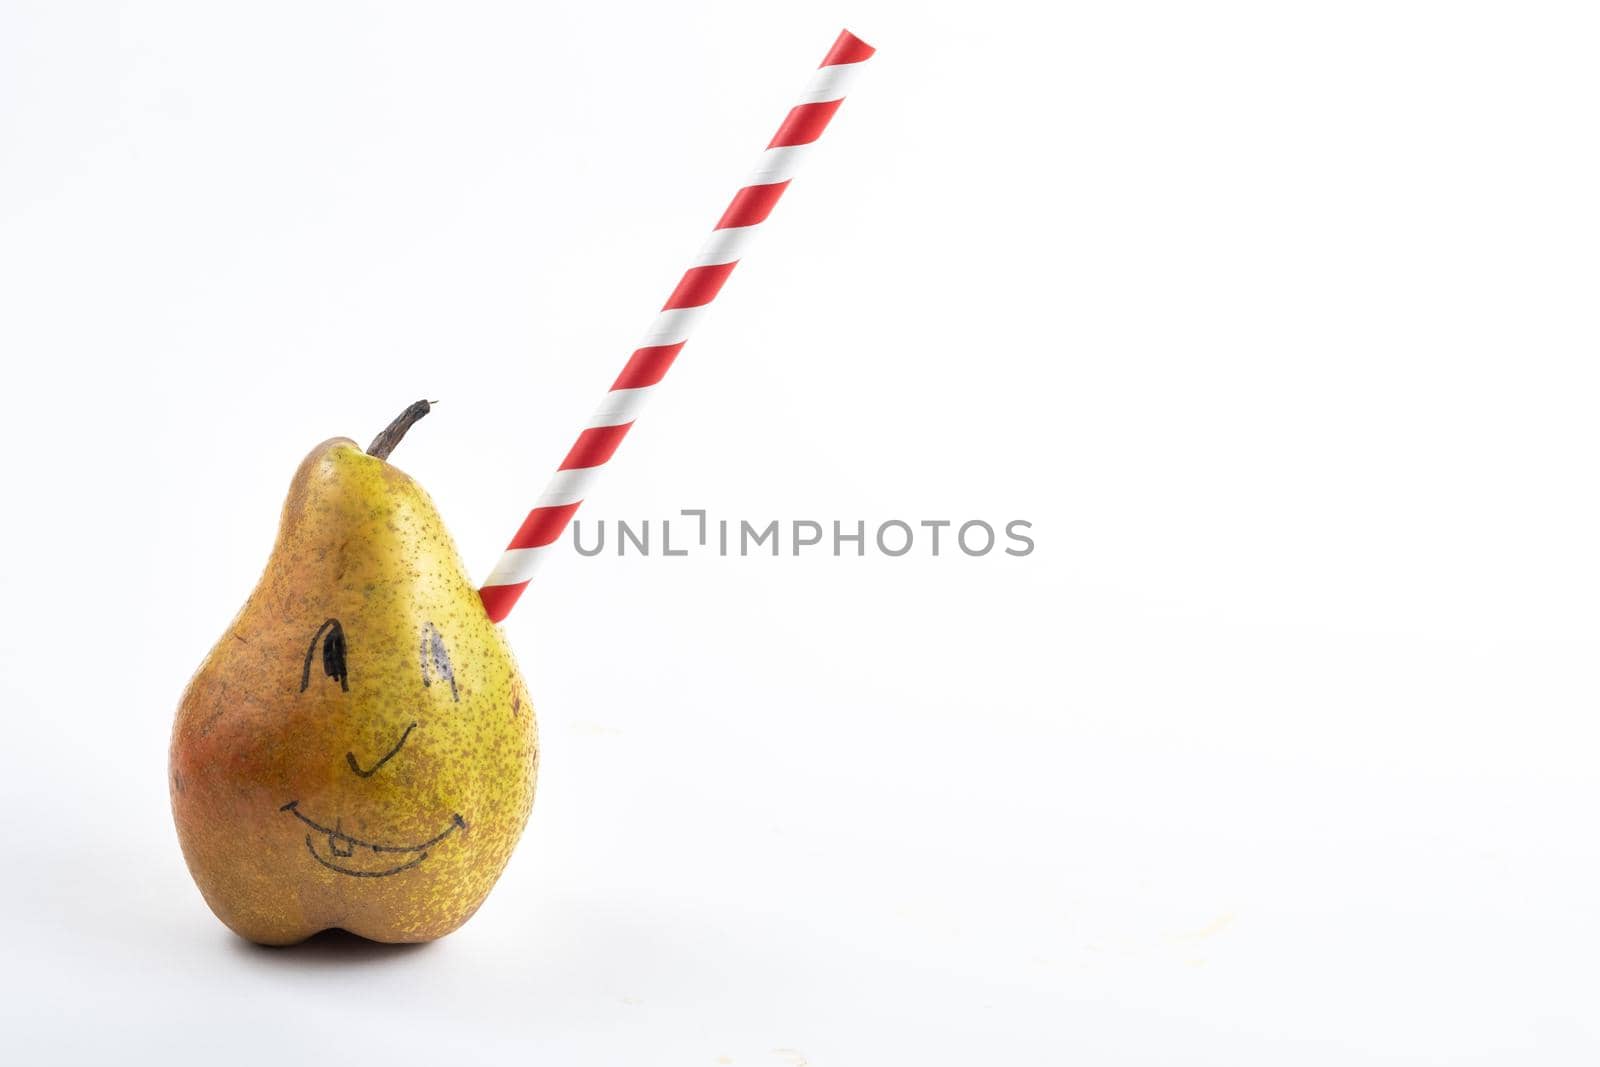 A large pear with a drinking tube sticking out of it on a white background by Lobachad